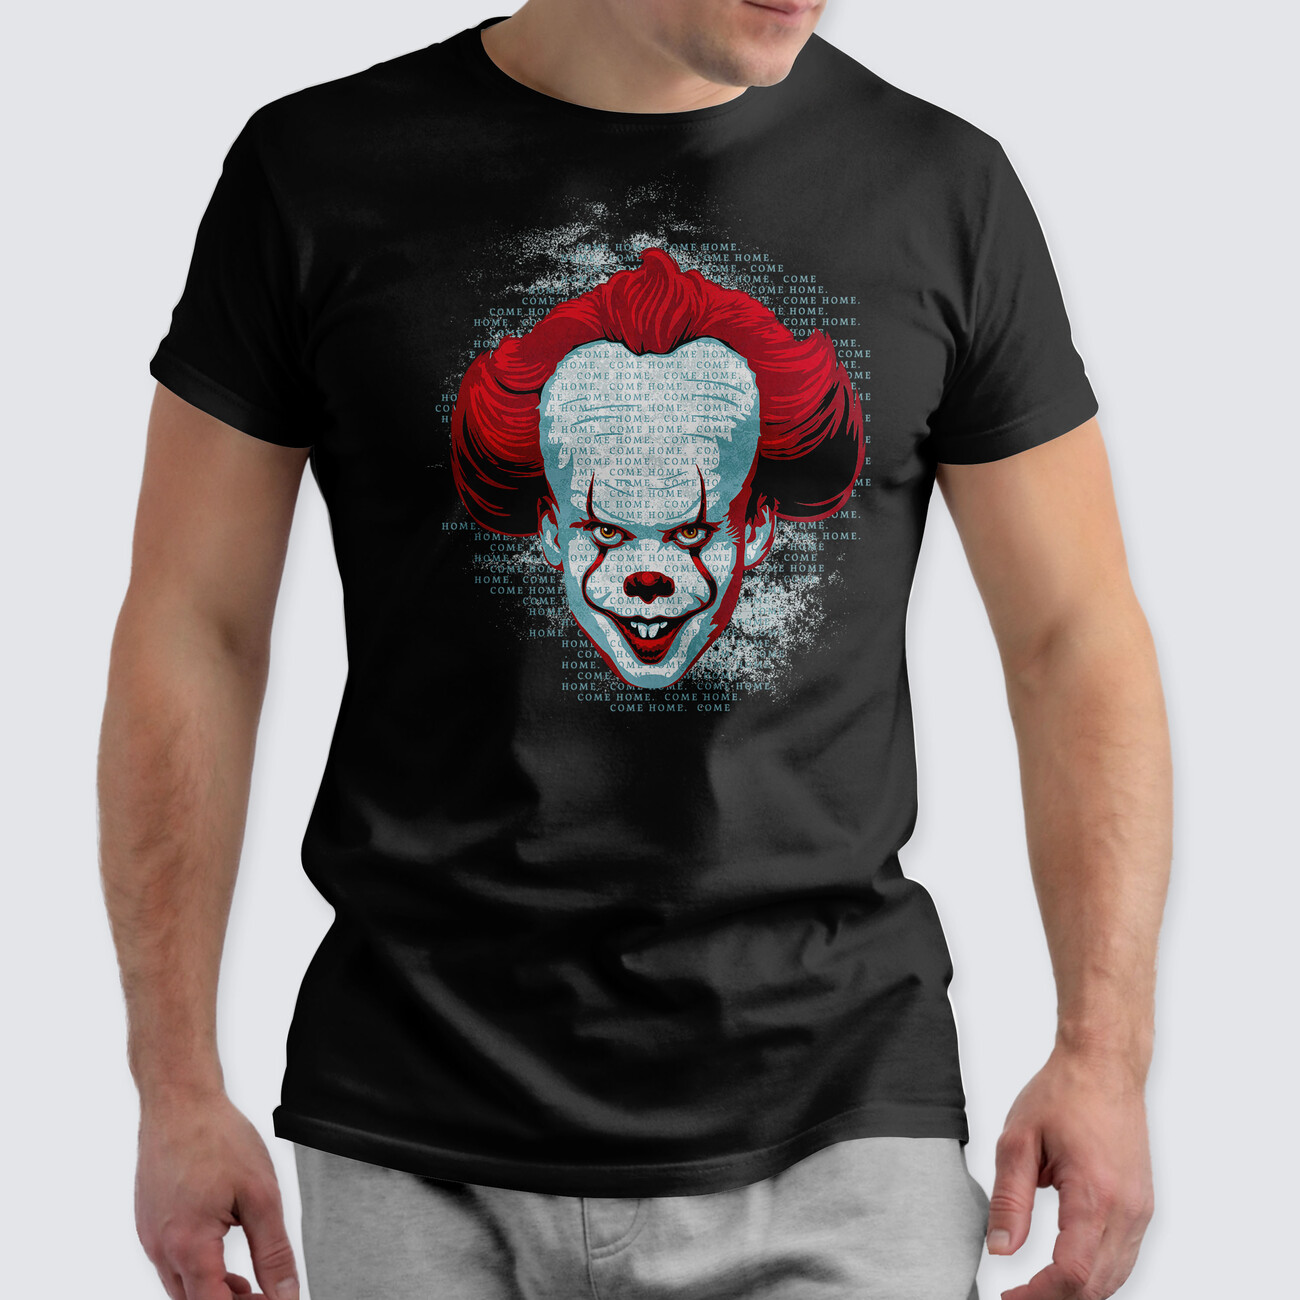 IT - Pennywise | Clothes for merchandise fans